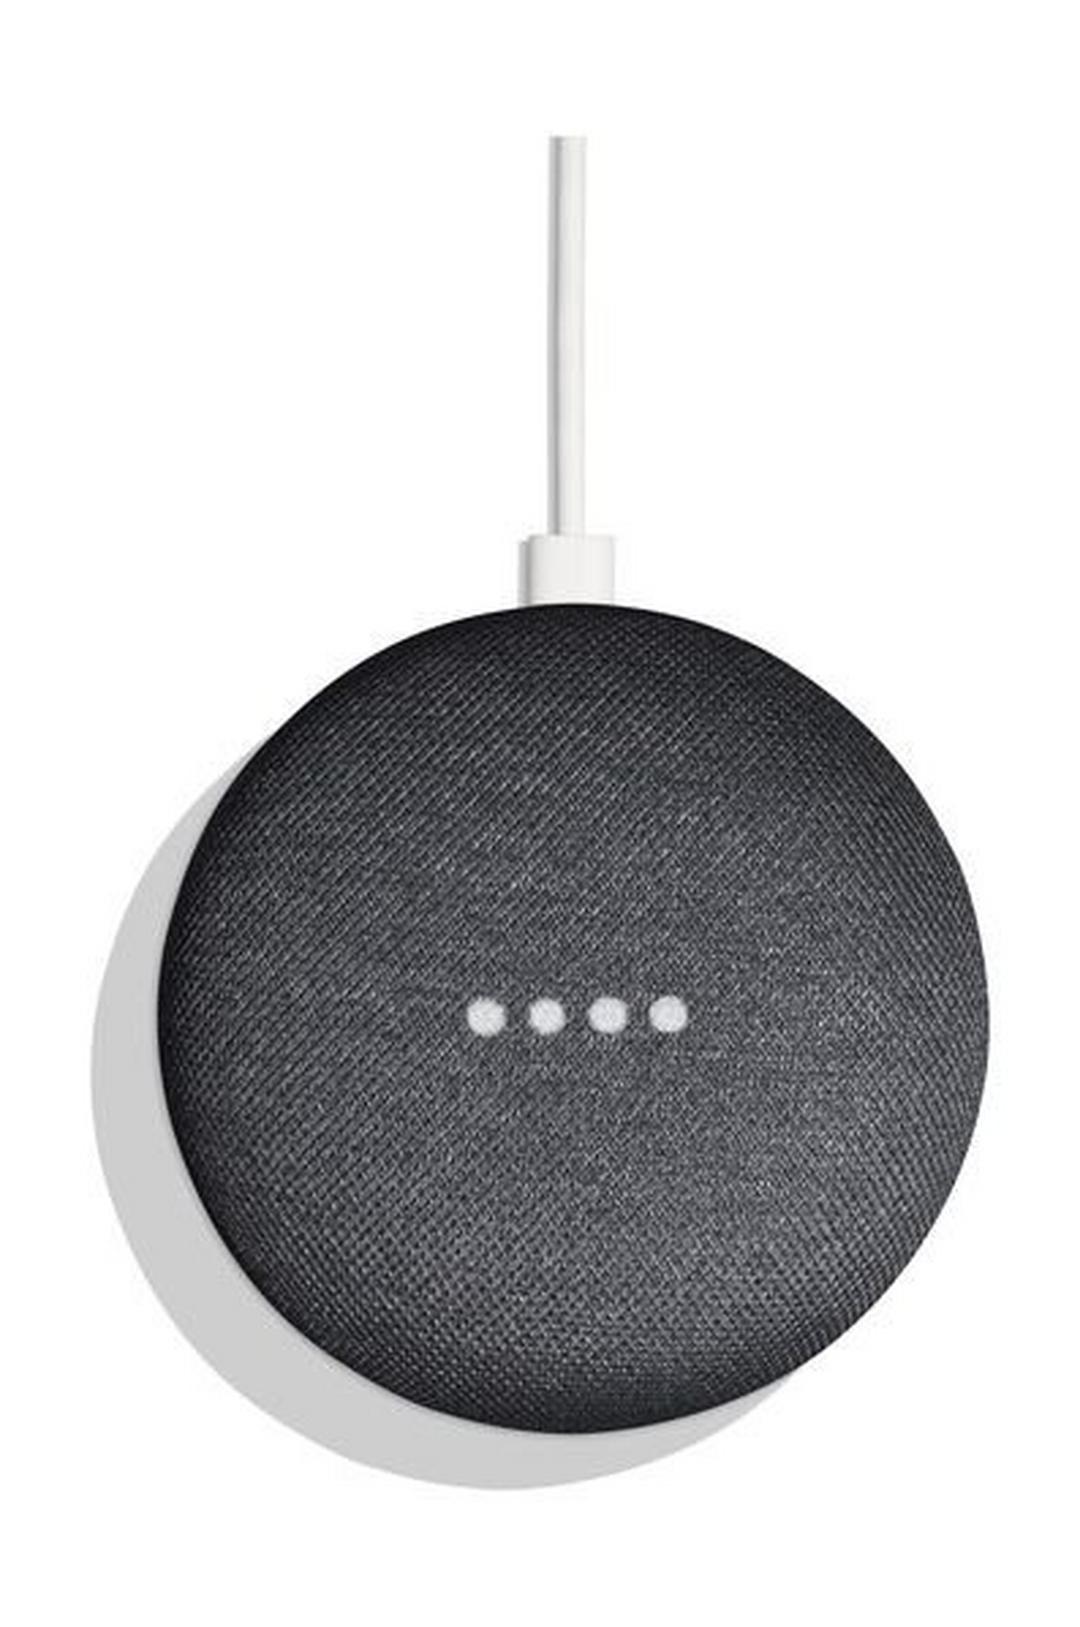 Google Home Mini Personal Assistant - Charcoal